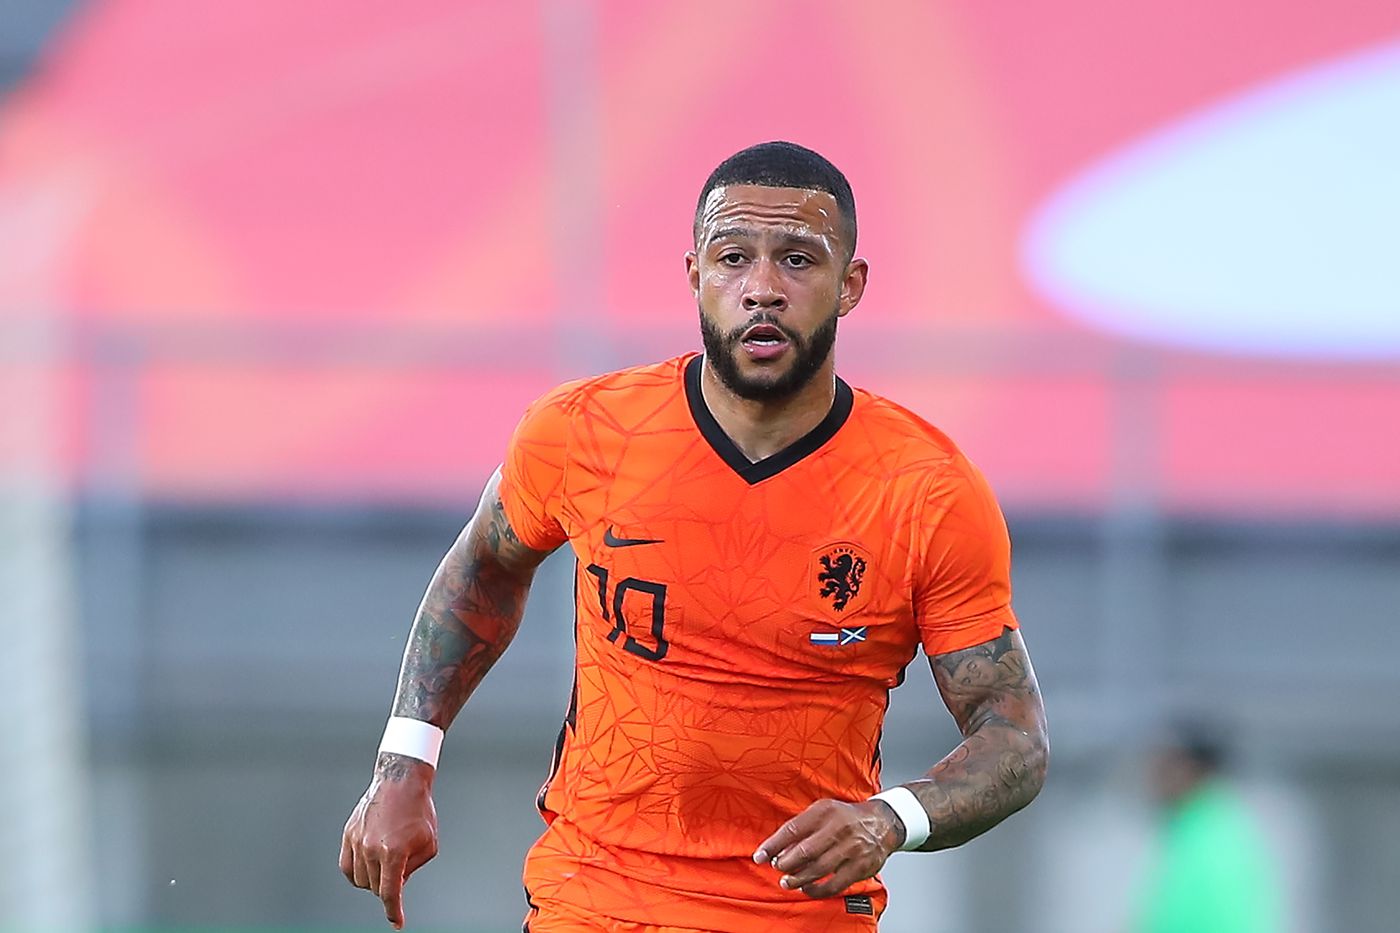 Euro 2021 fantasy soccer advice: Netherlands' Memphis Depay a strong DFS option in Group C